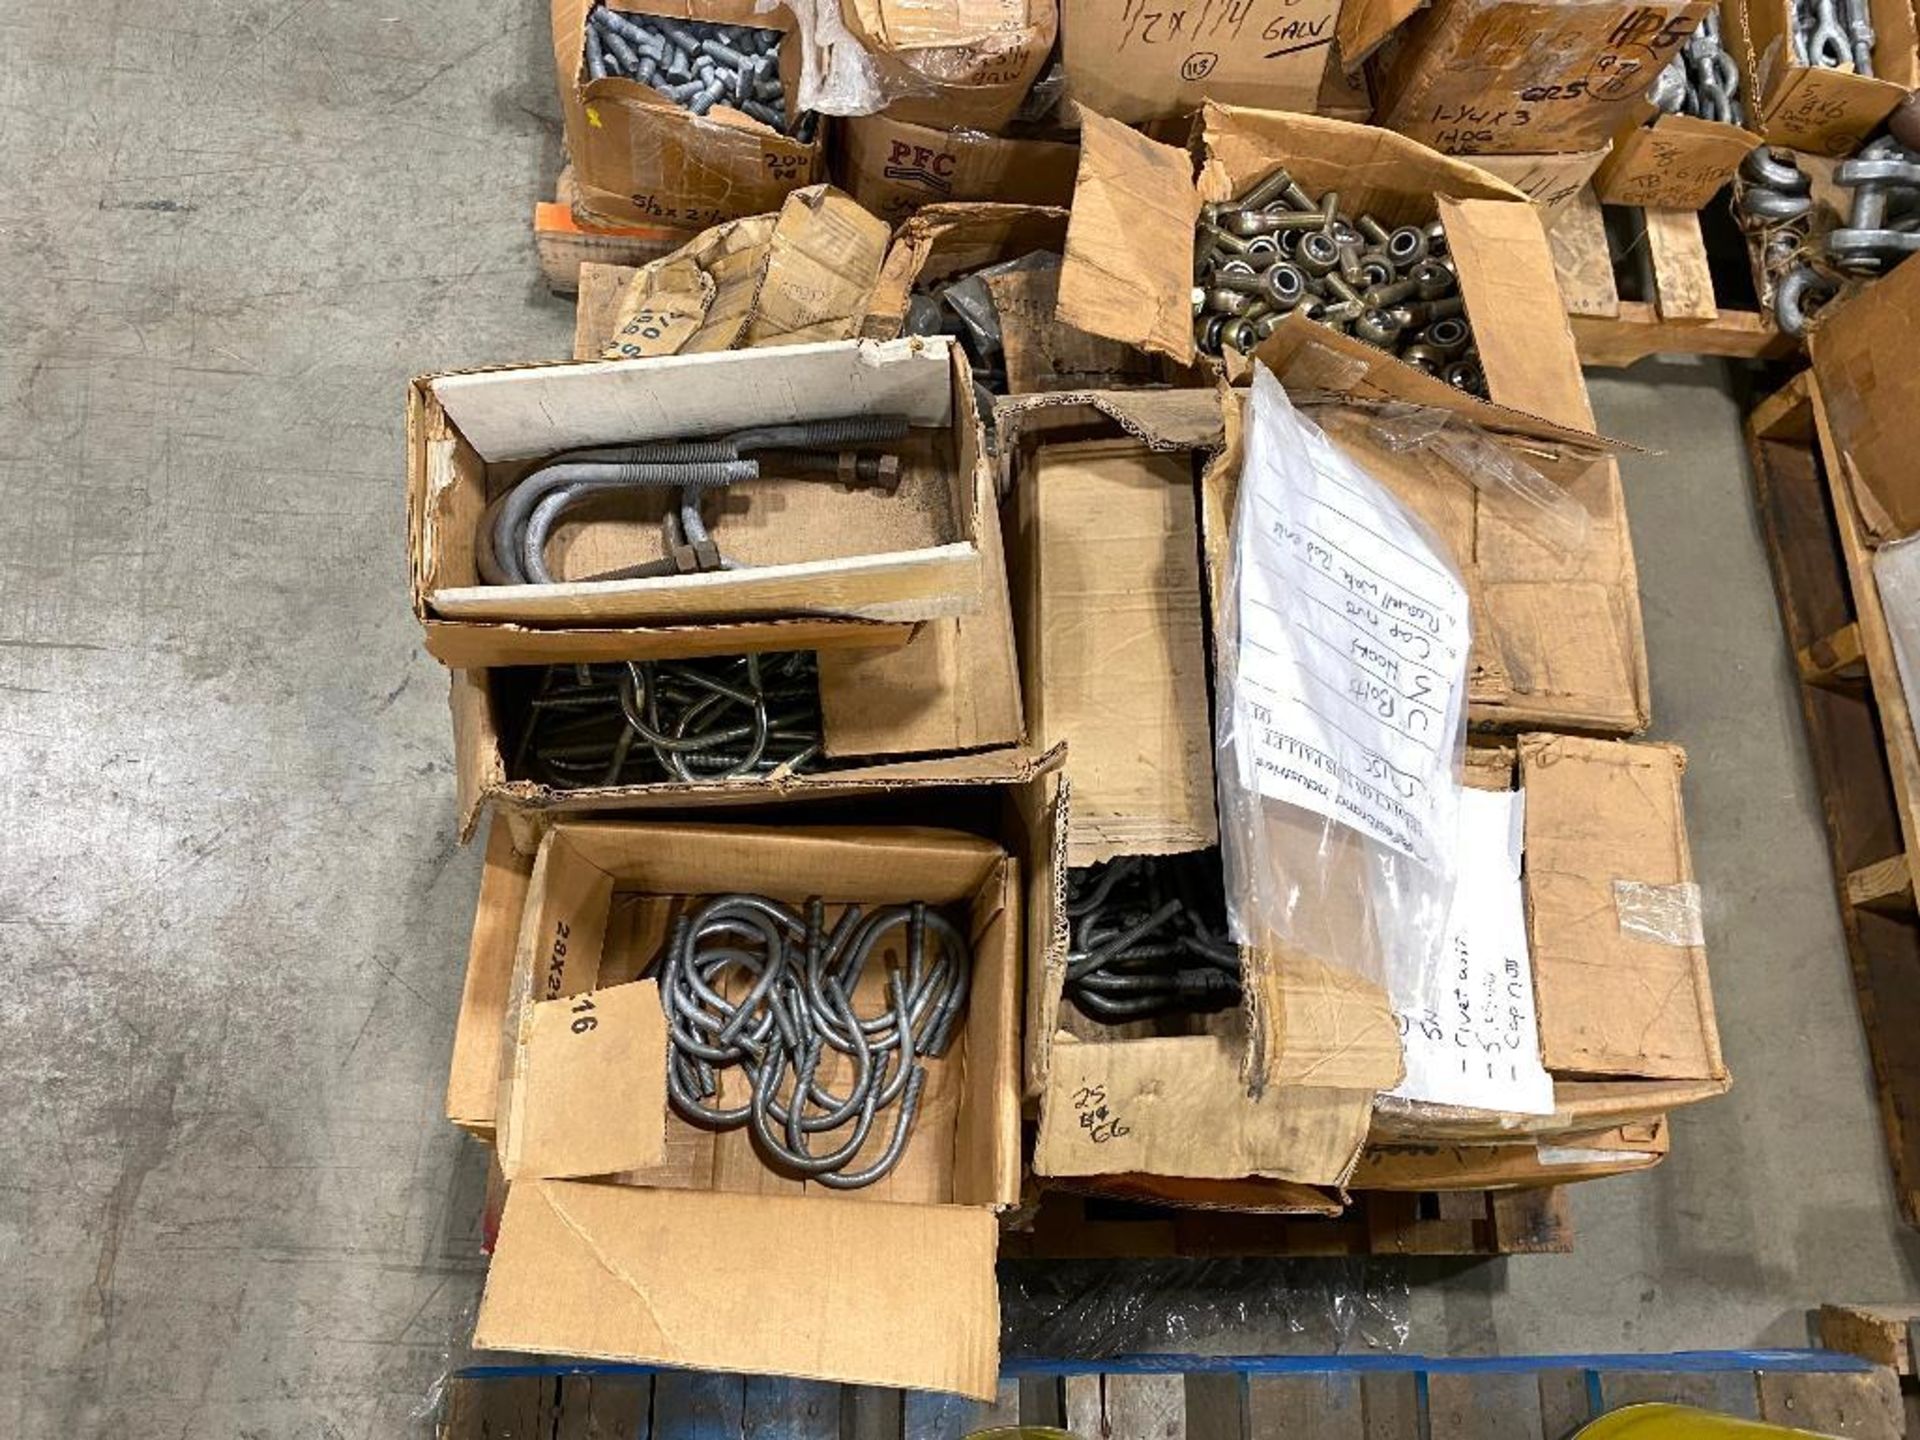 Pallet of Asst. U-Bolts, S-Hooks, Cap Nuts, Wake Rod Ends - Image 3 of 3